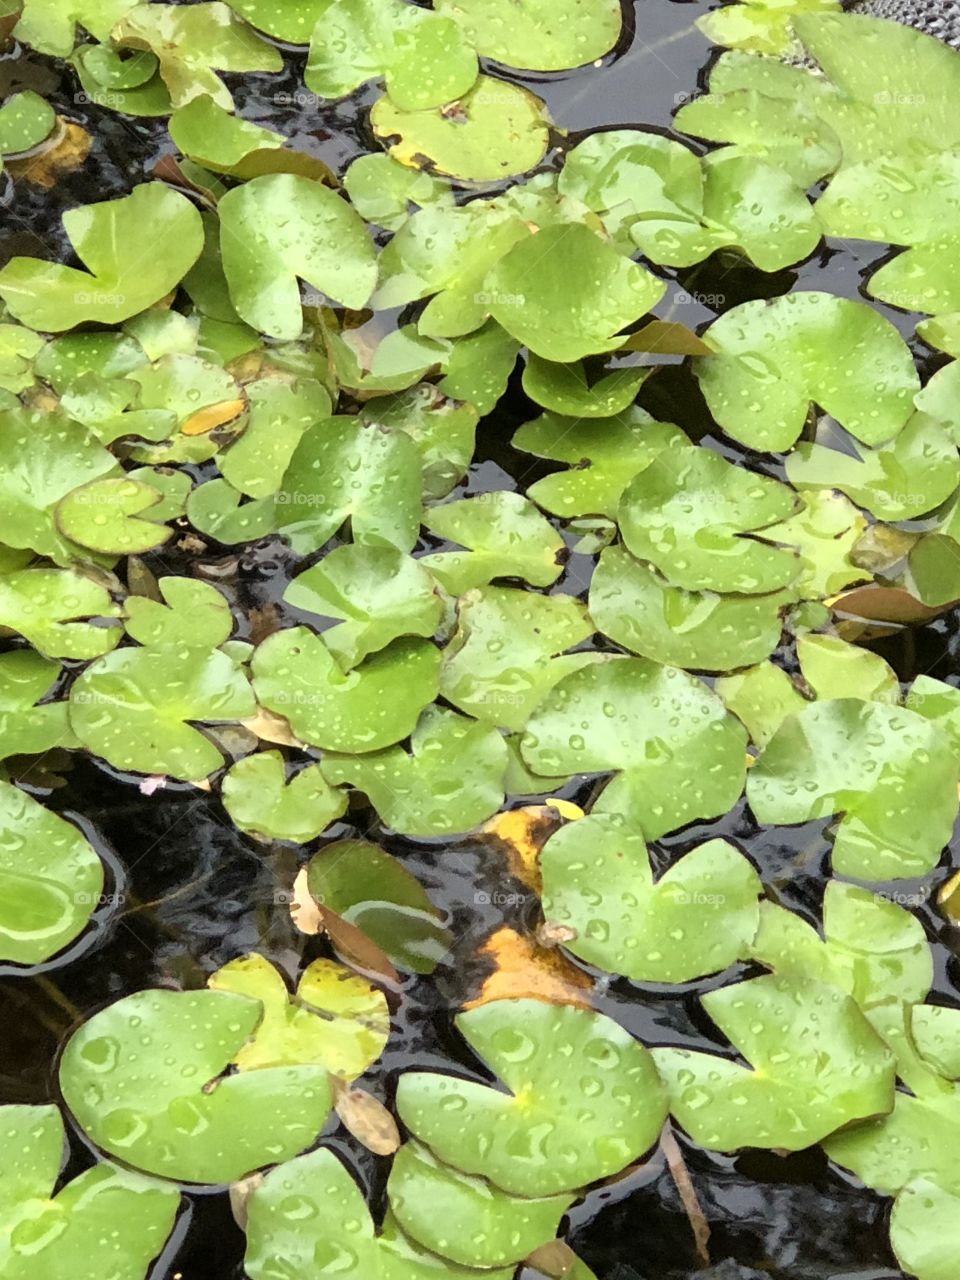 Lilly pads in a koi pond  